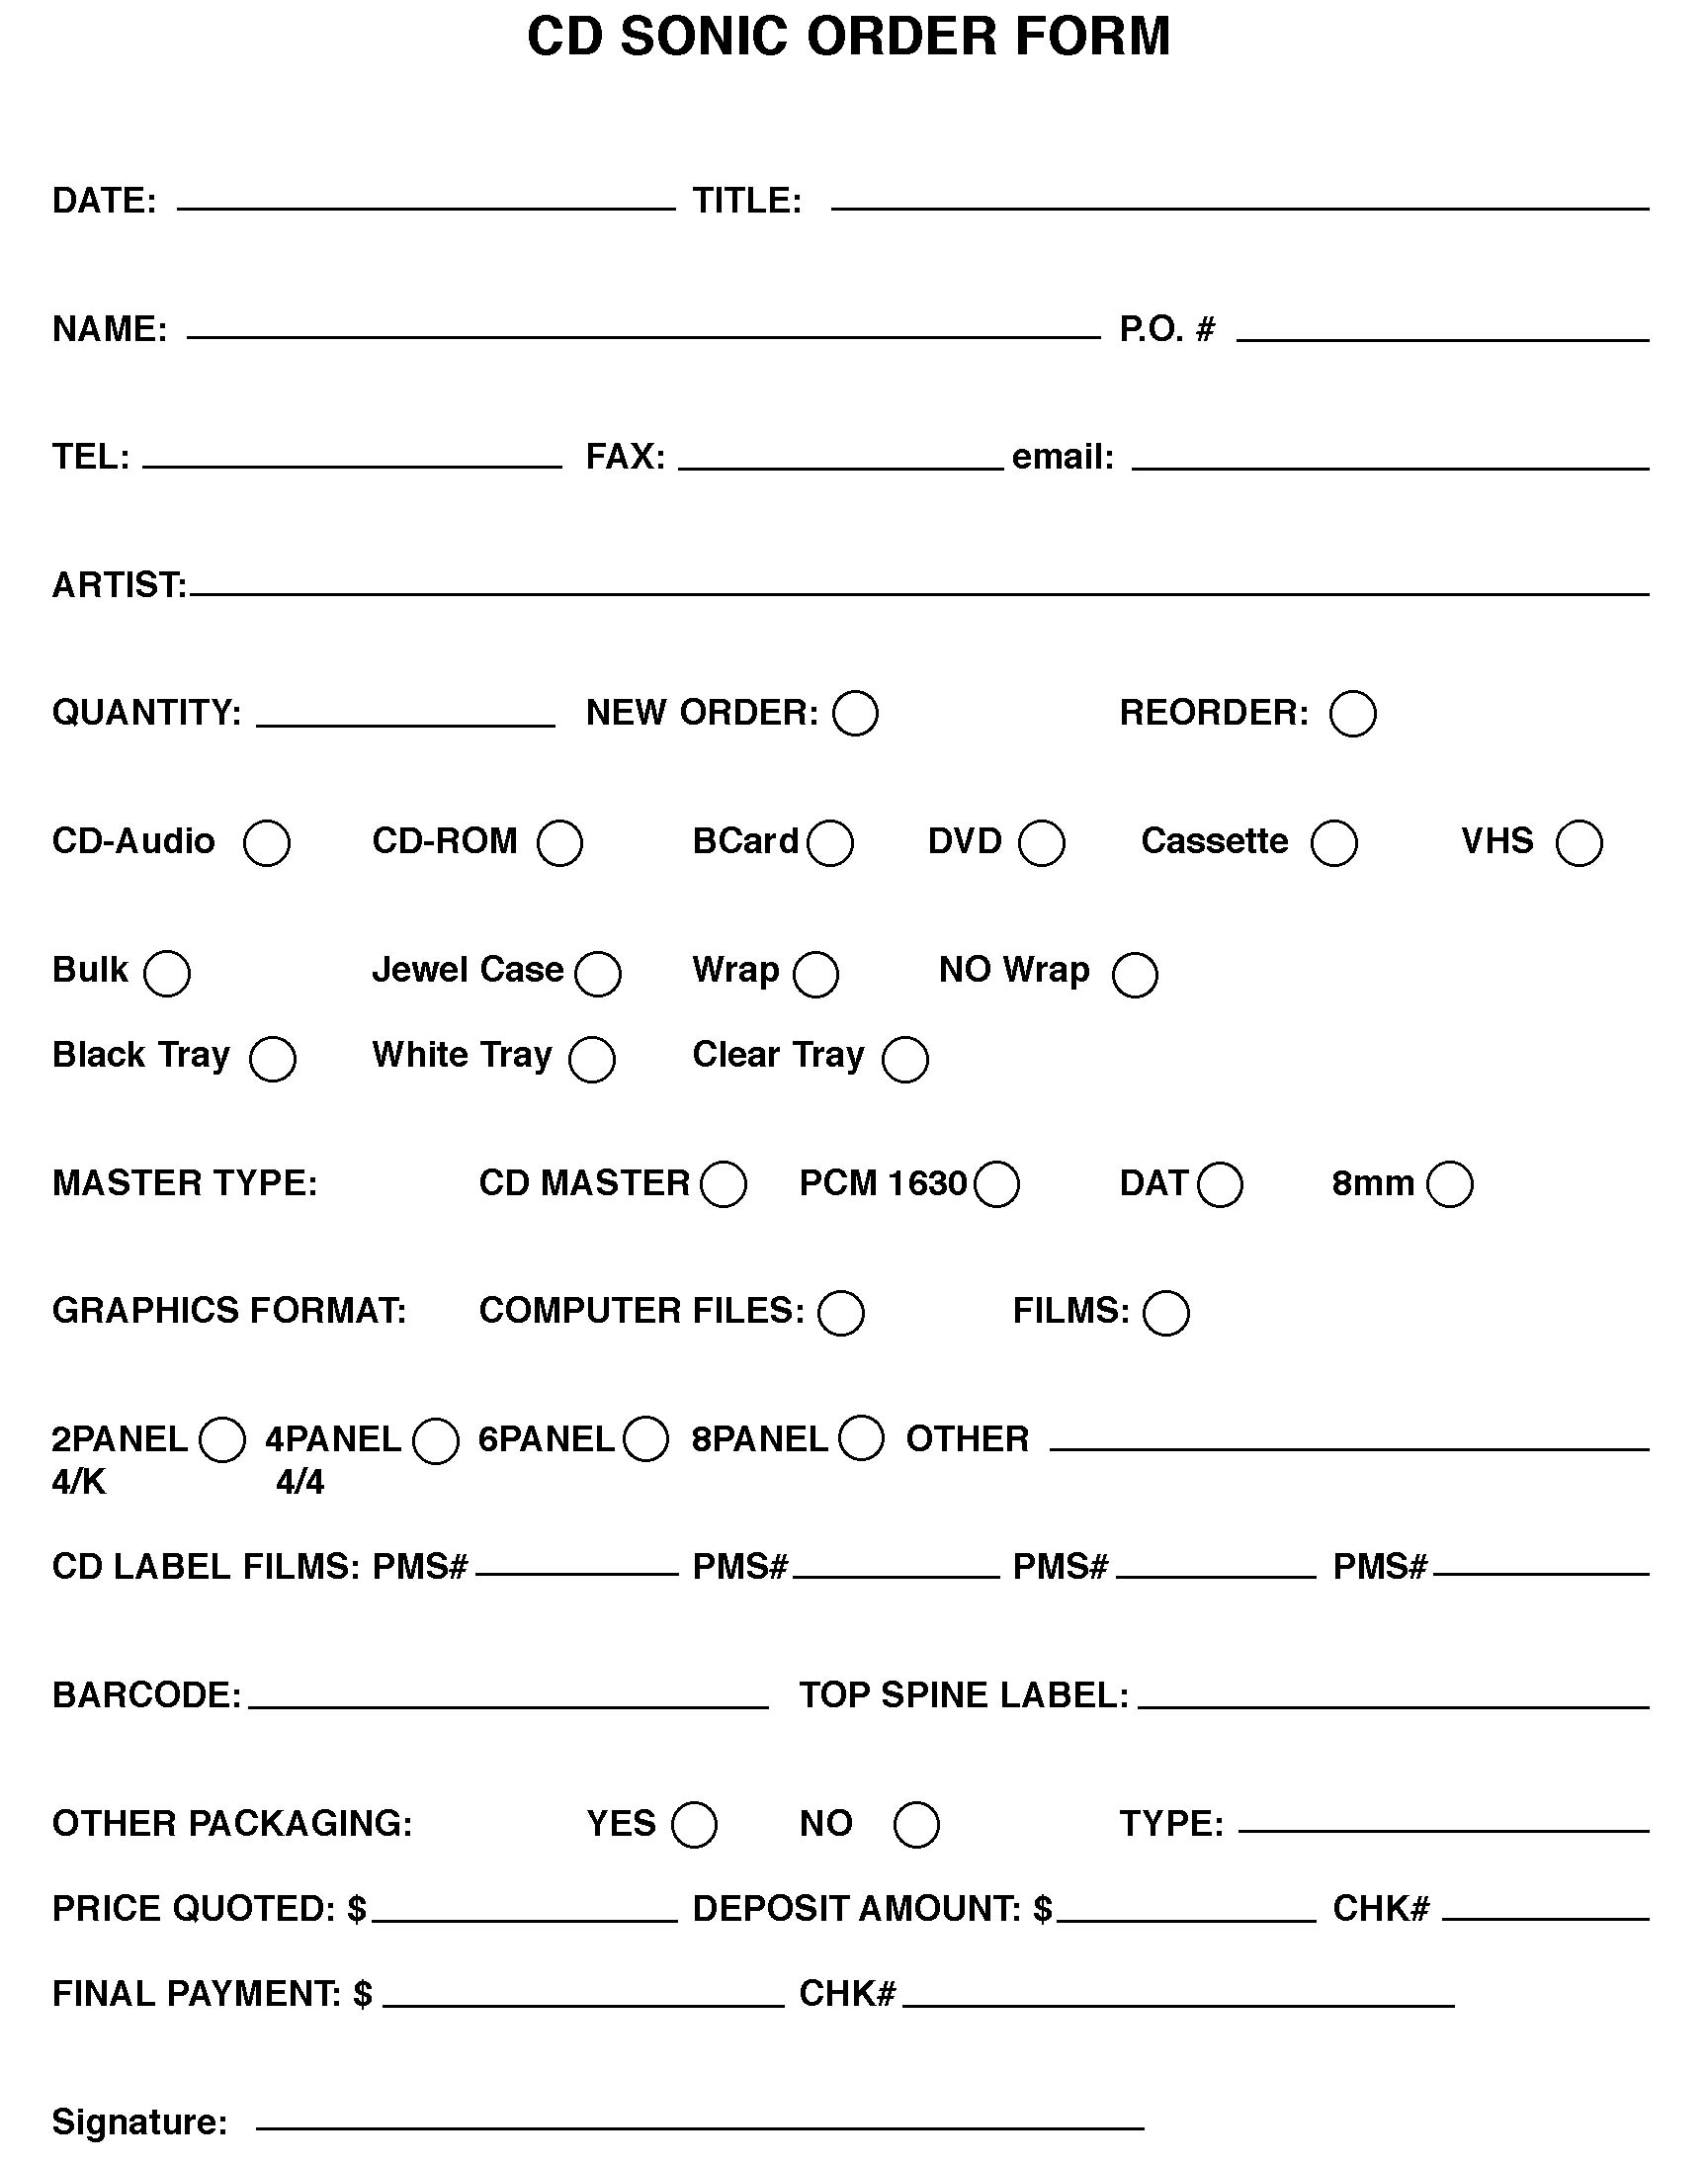 Graphic Design Order Form Template from www.cdsonic.com